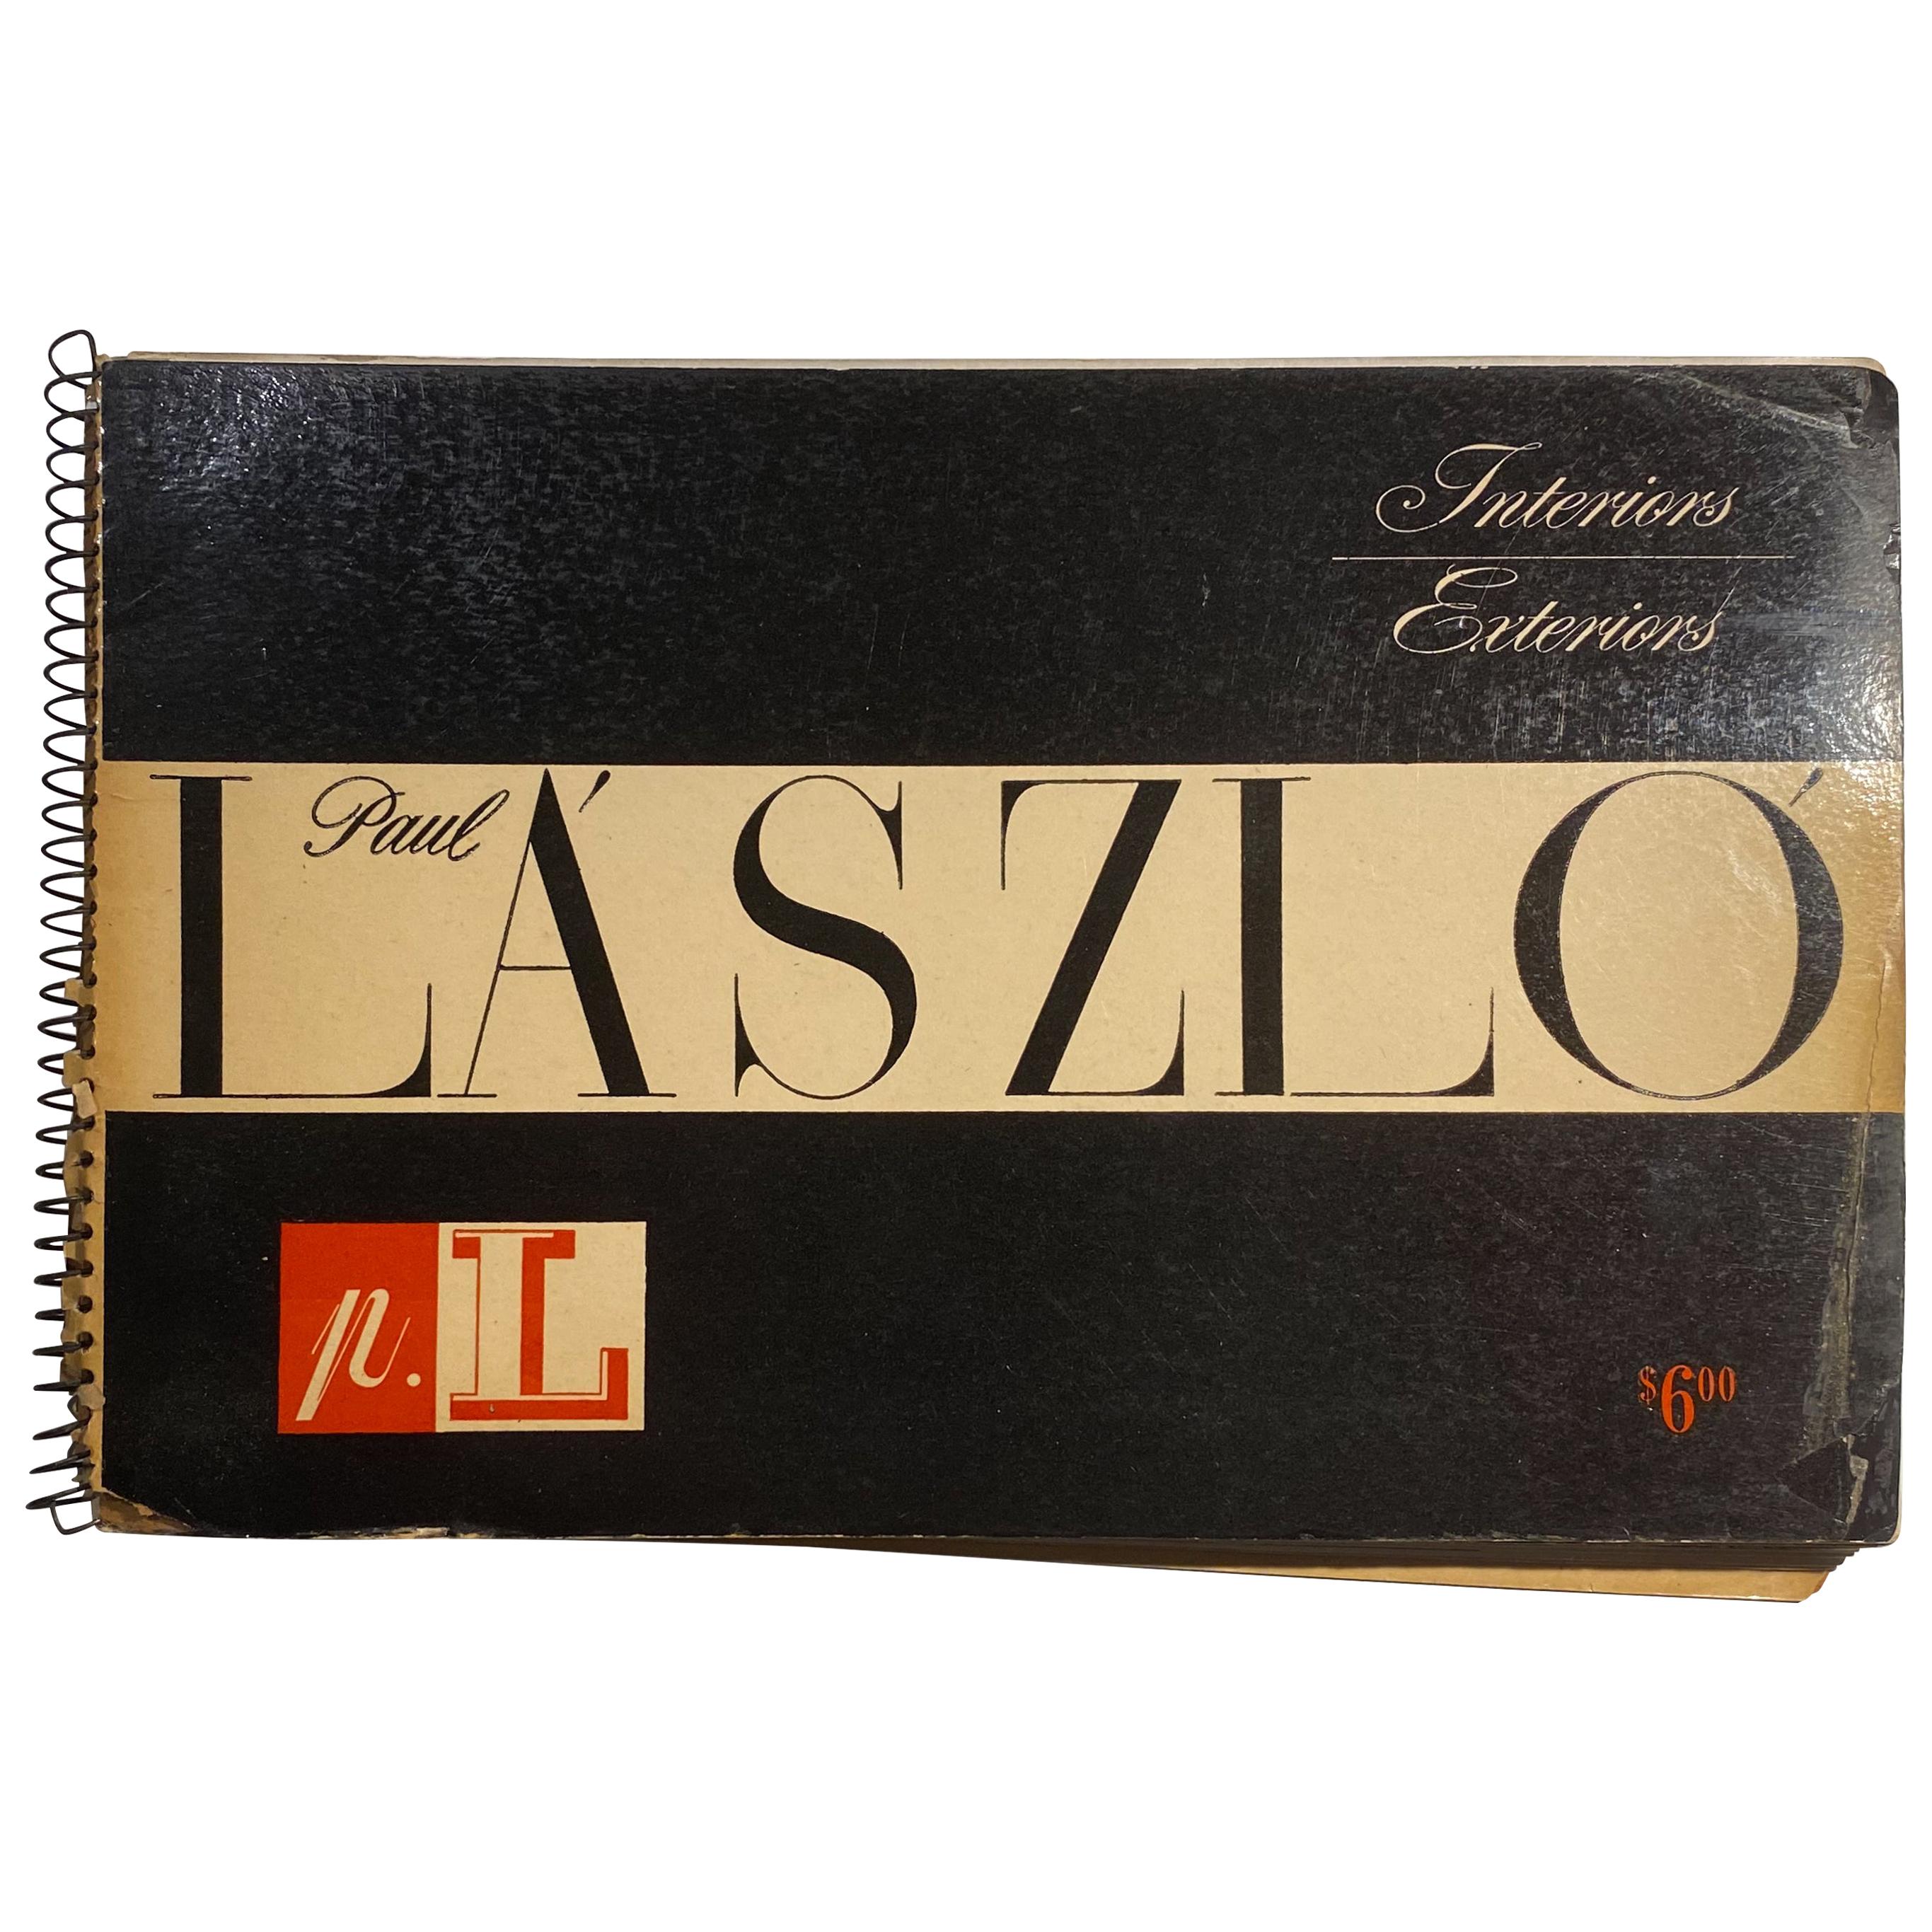 Paul Laszlo Catalog from 1947 For Sale